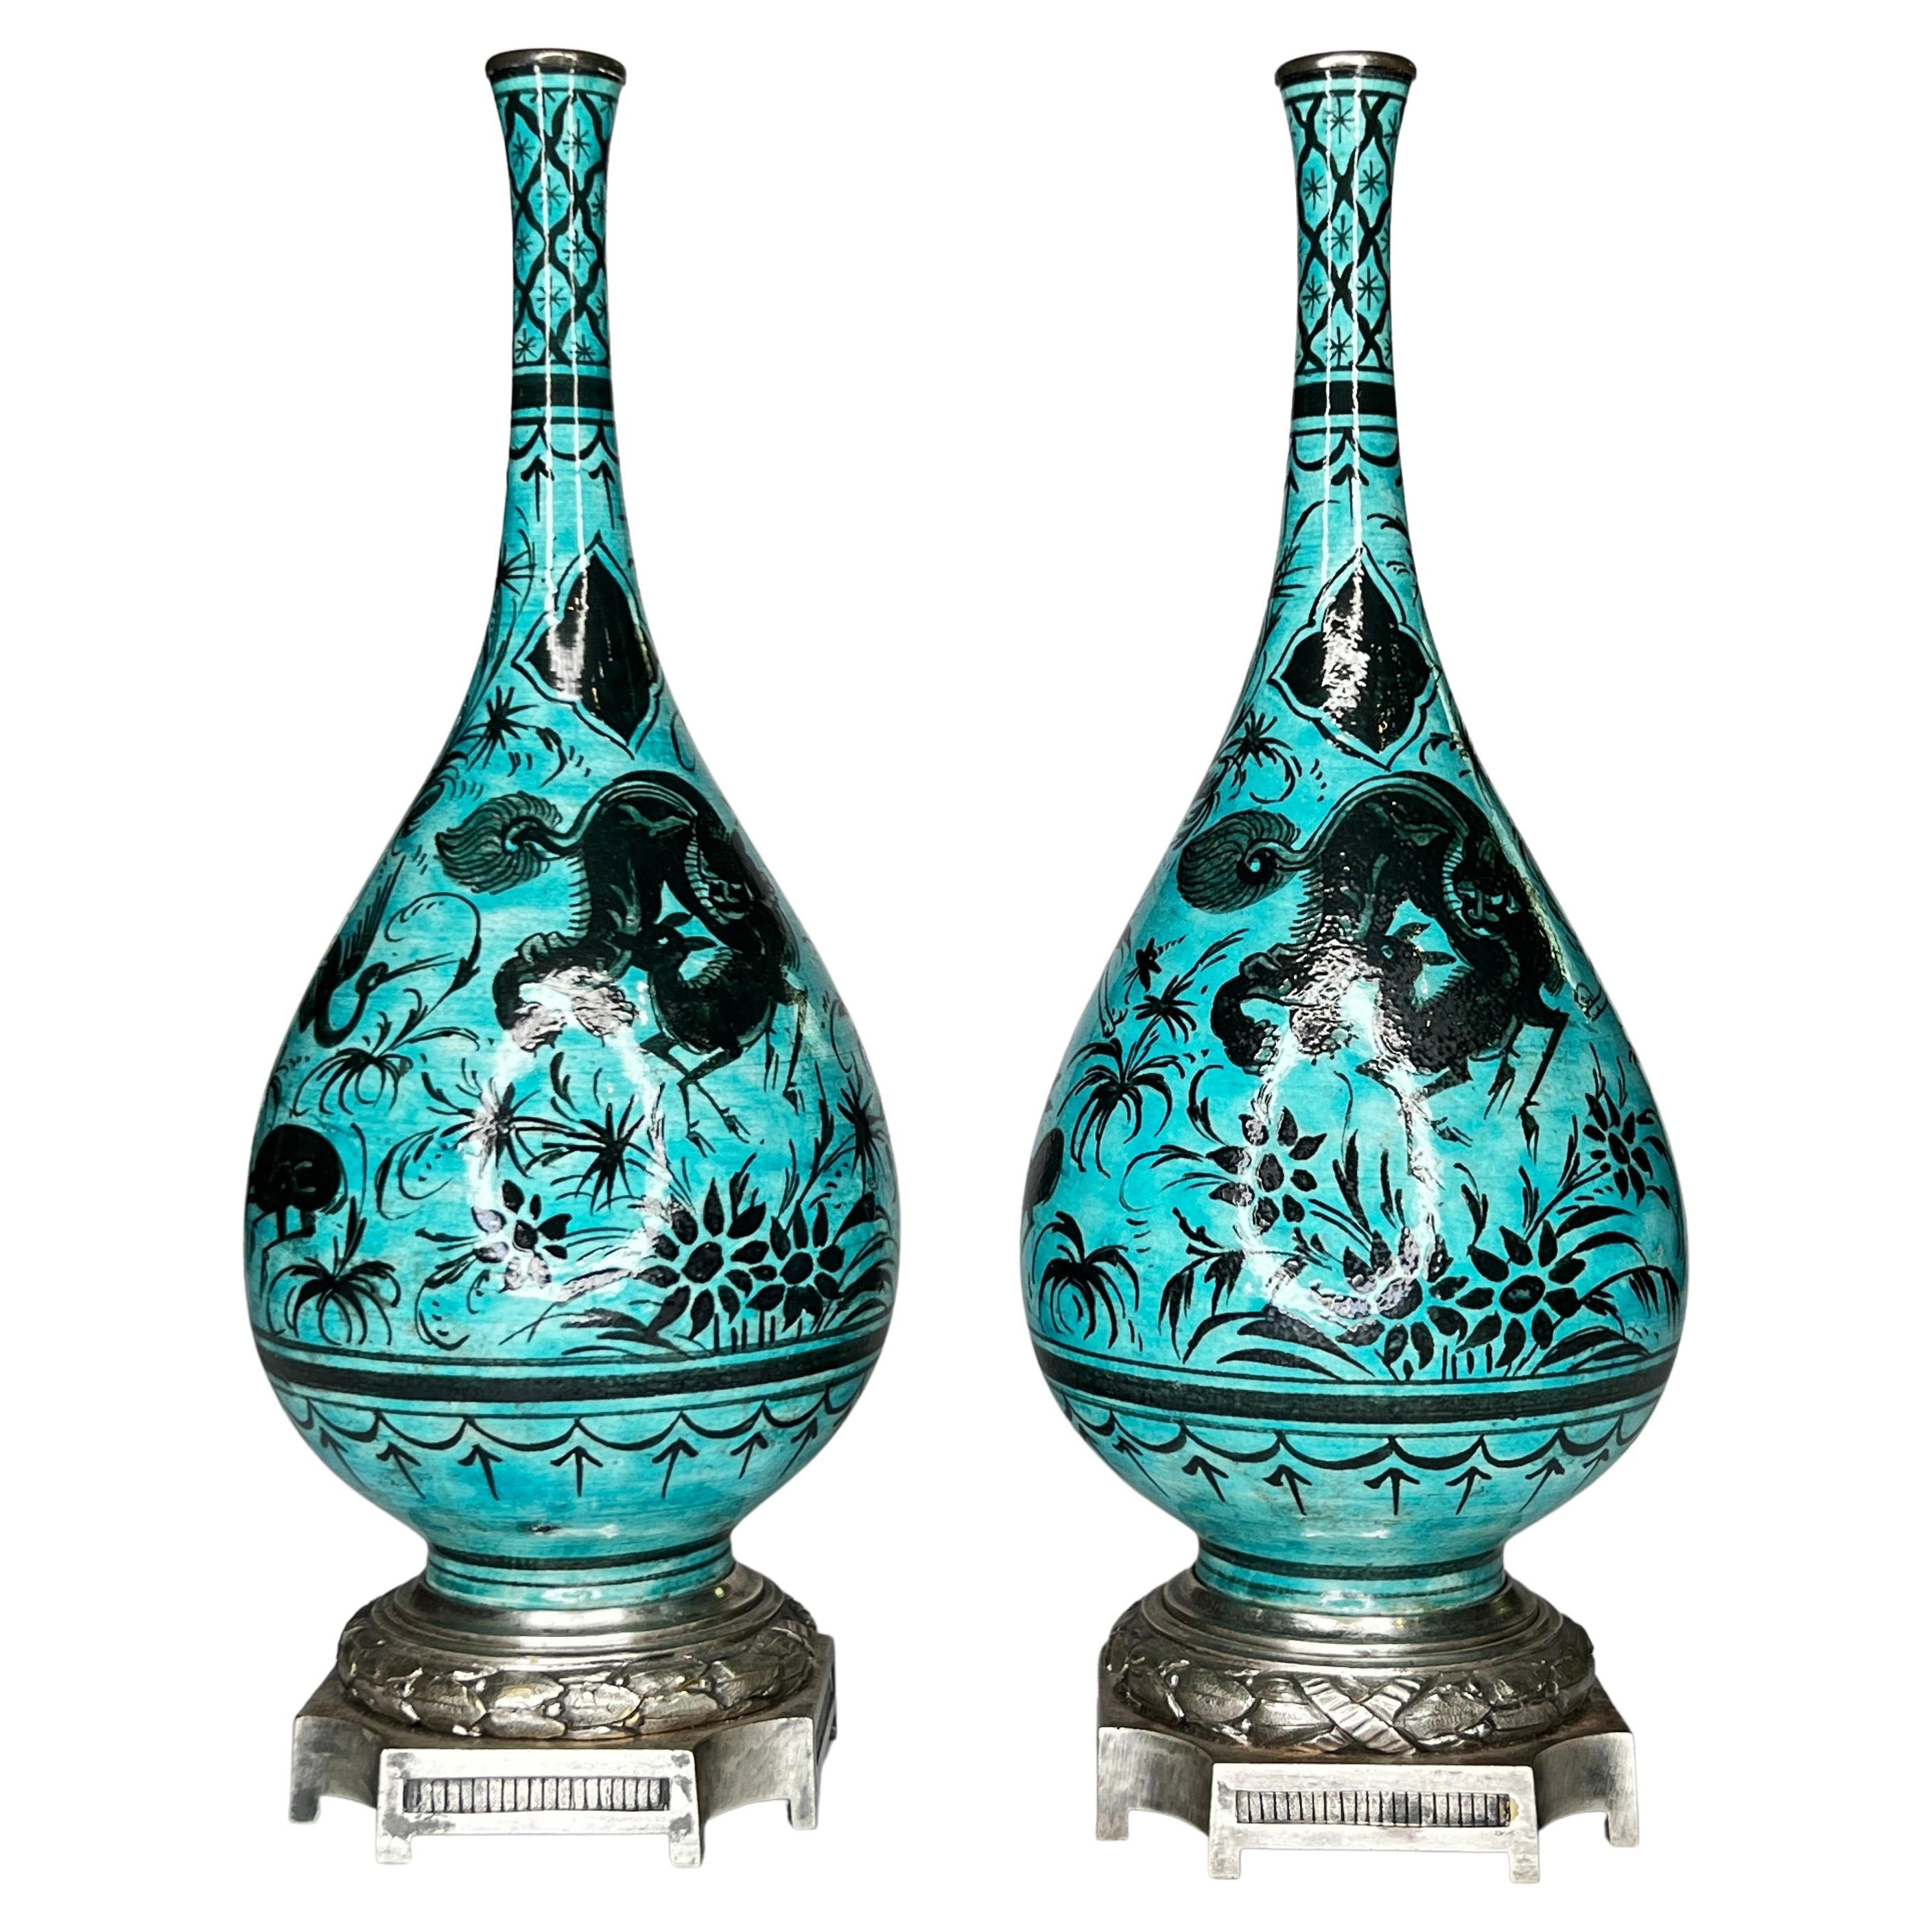 Persian Ware Ceramic Bottle Vases Attributed to Samson et Cie For Sale